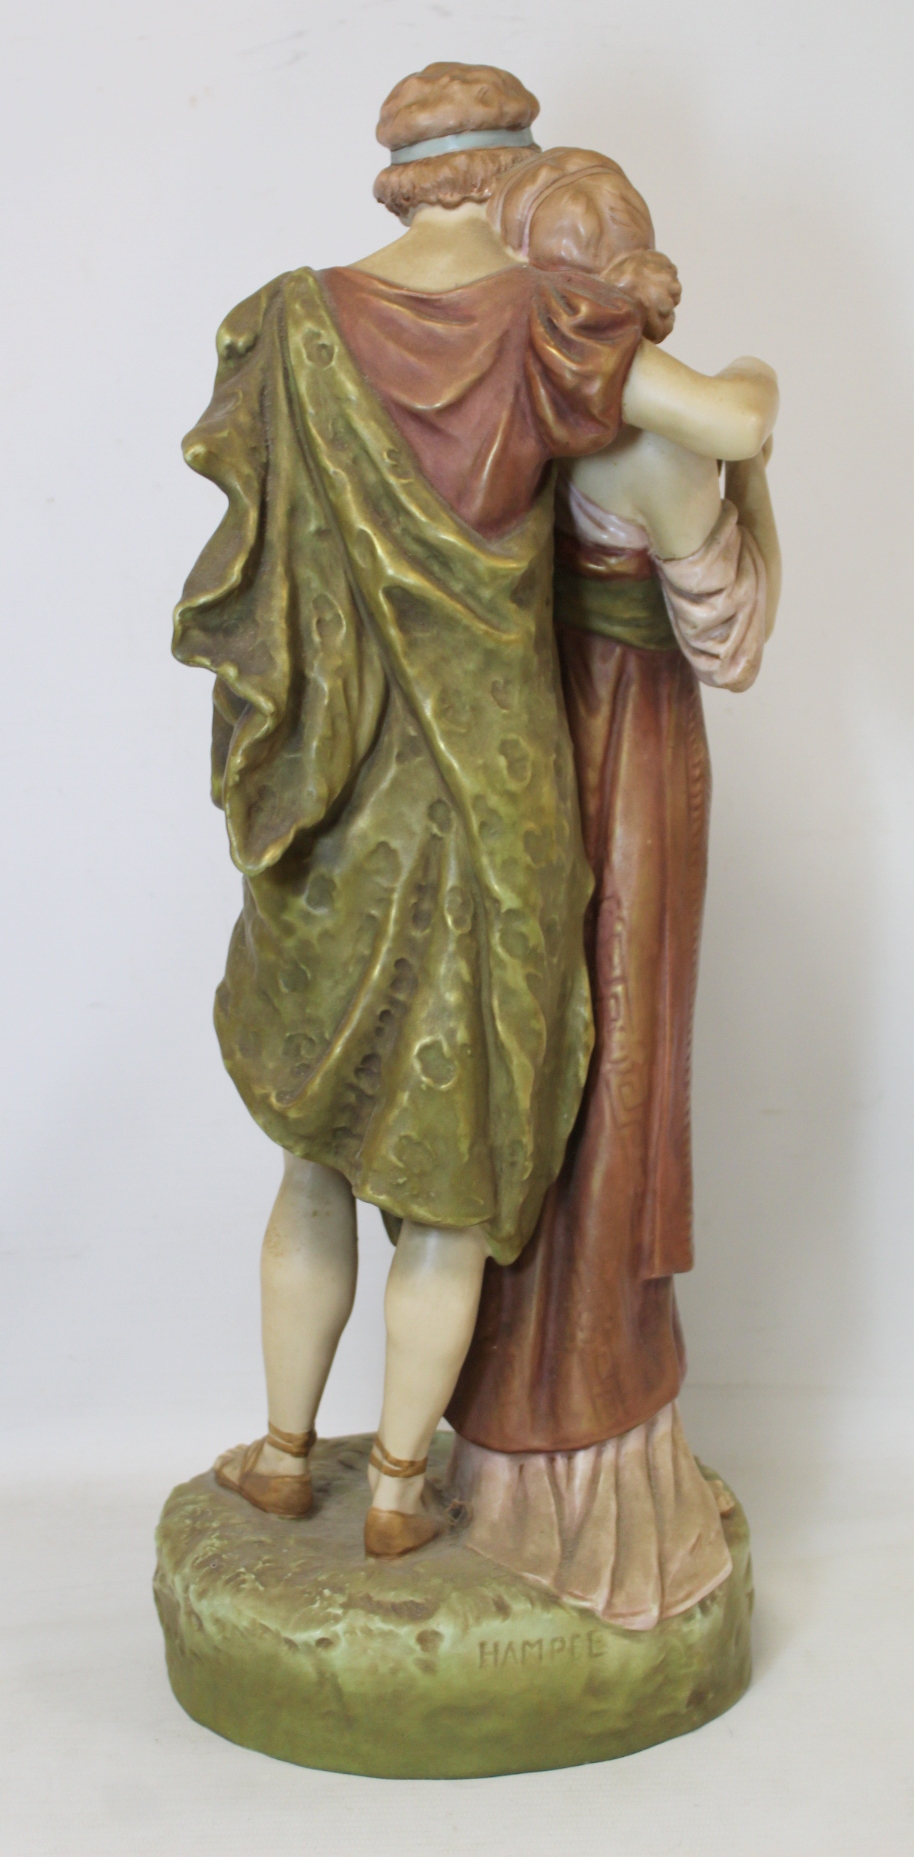 Royal Dux porcelain figure group of two lovers, both in classical dress, by Alois Hampel, - Image 3 of 9